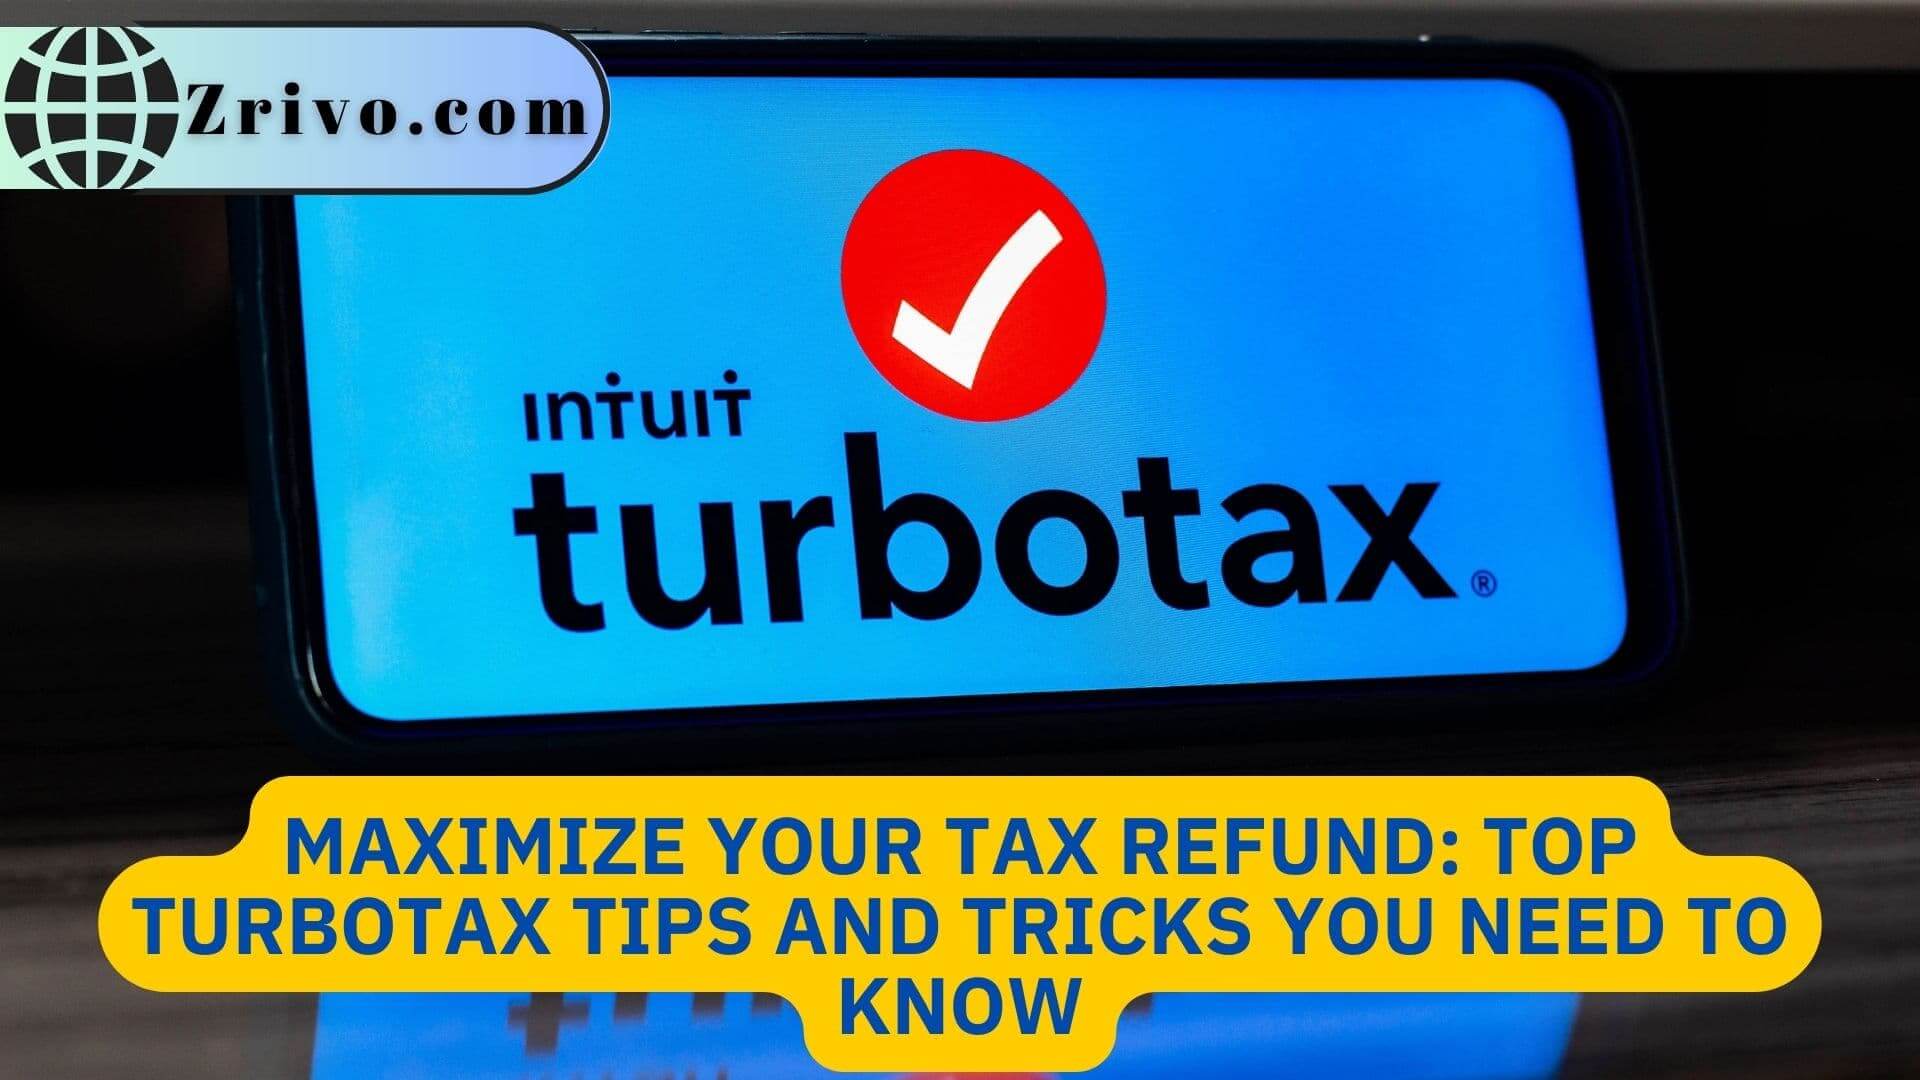 Maximize Your Tax Refund: Top TurboTax Tips and Tricks You Need to Know